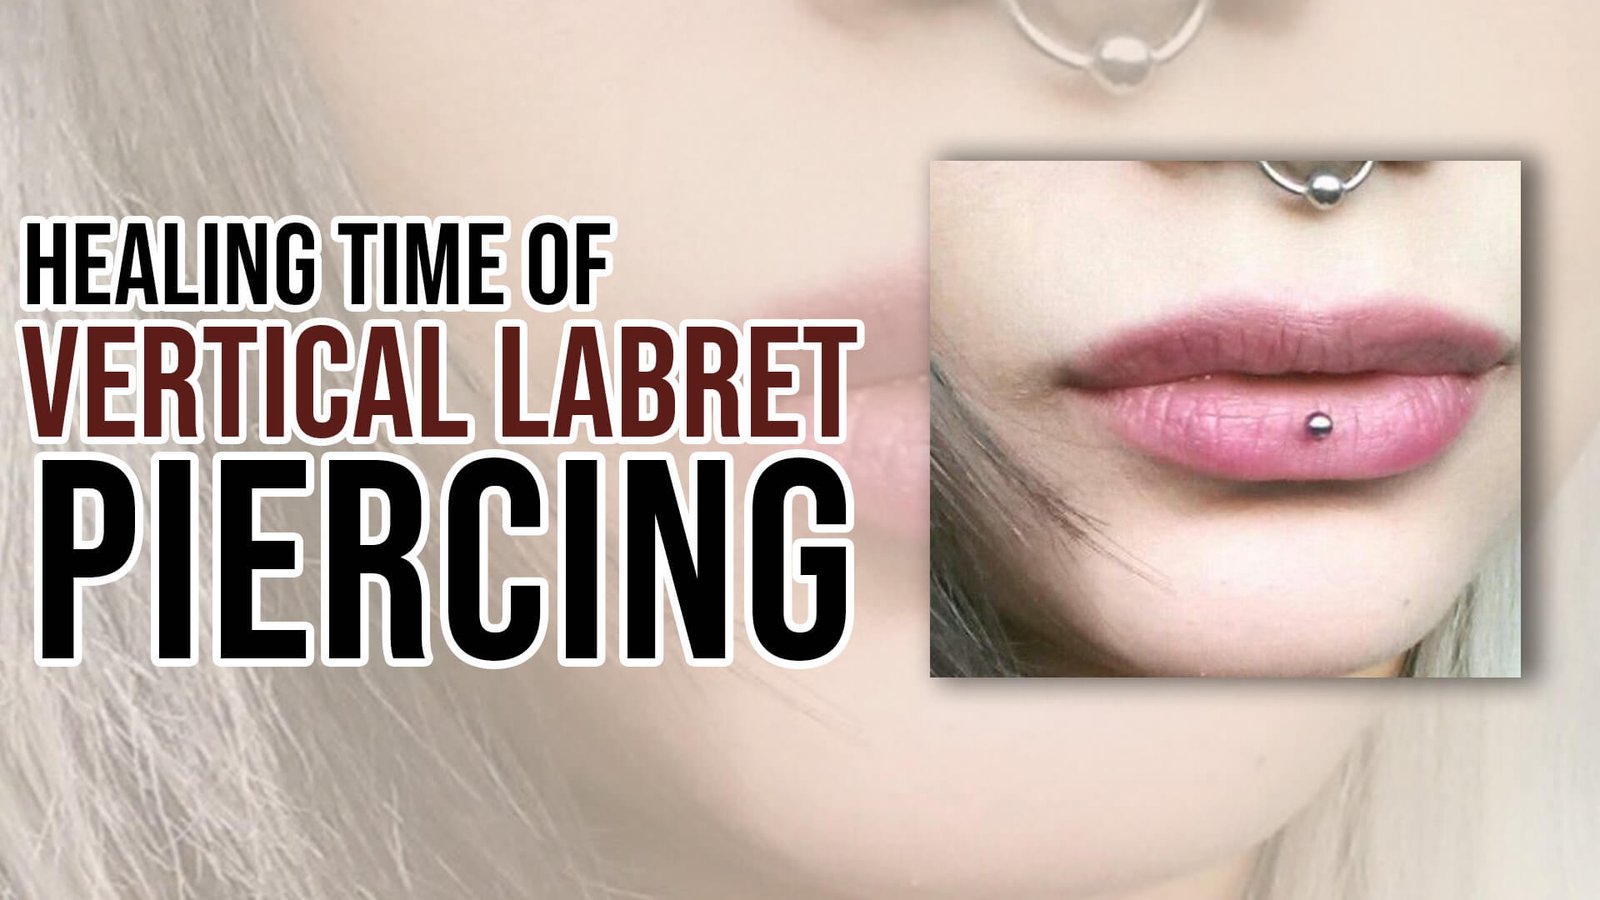 Healing Time of Vertical Labret Piercing